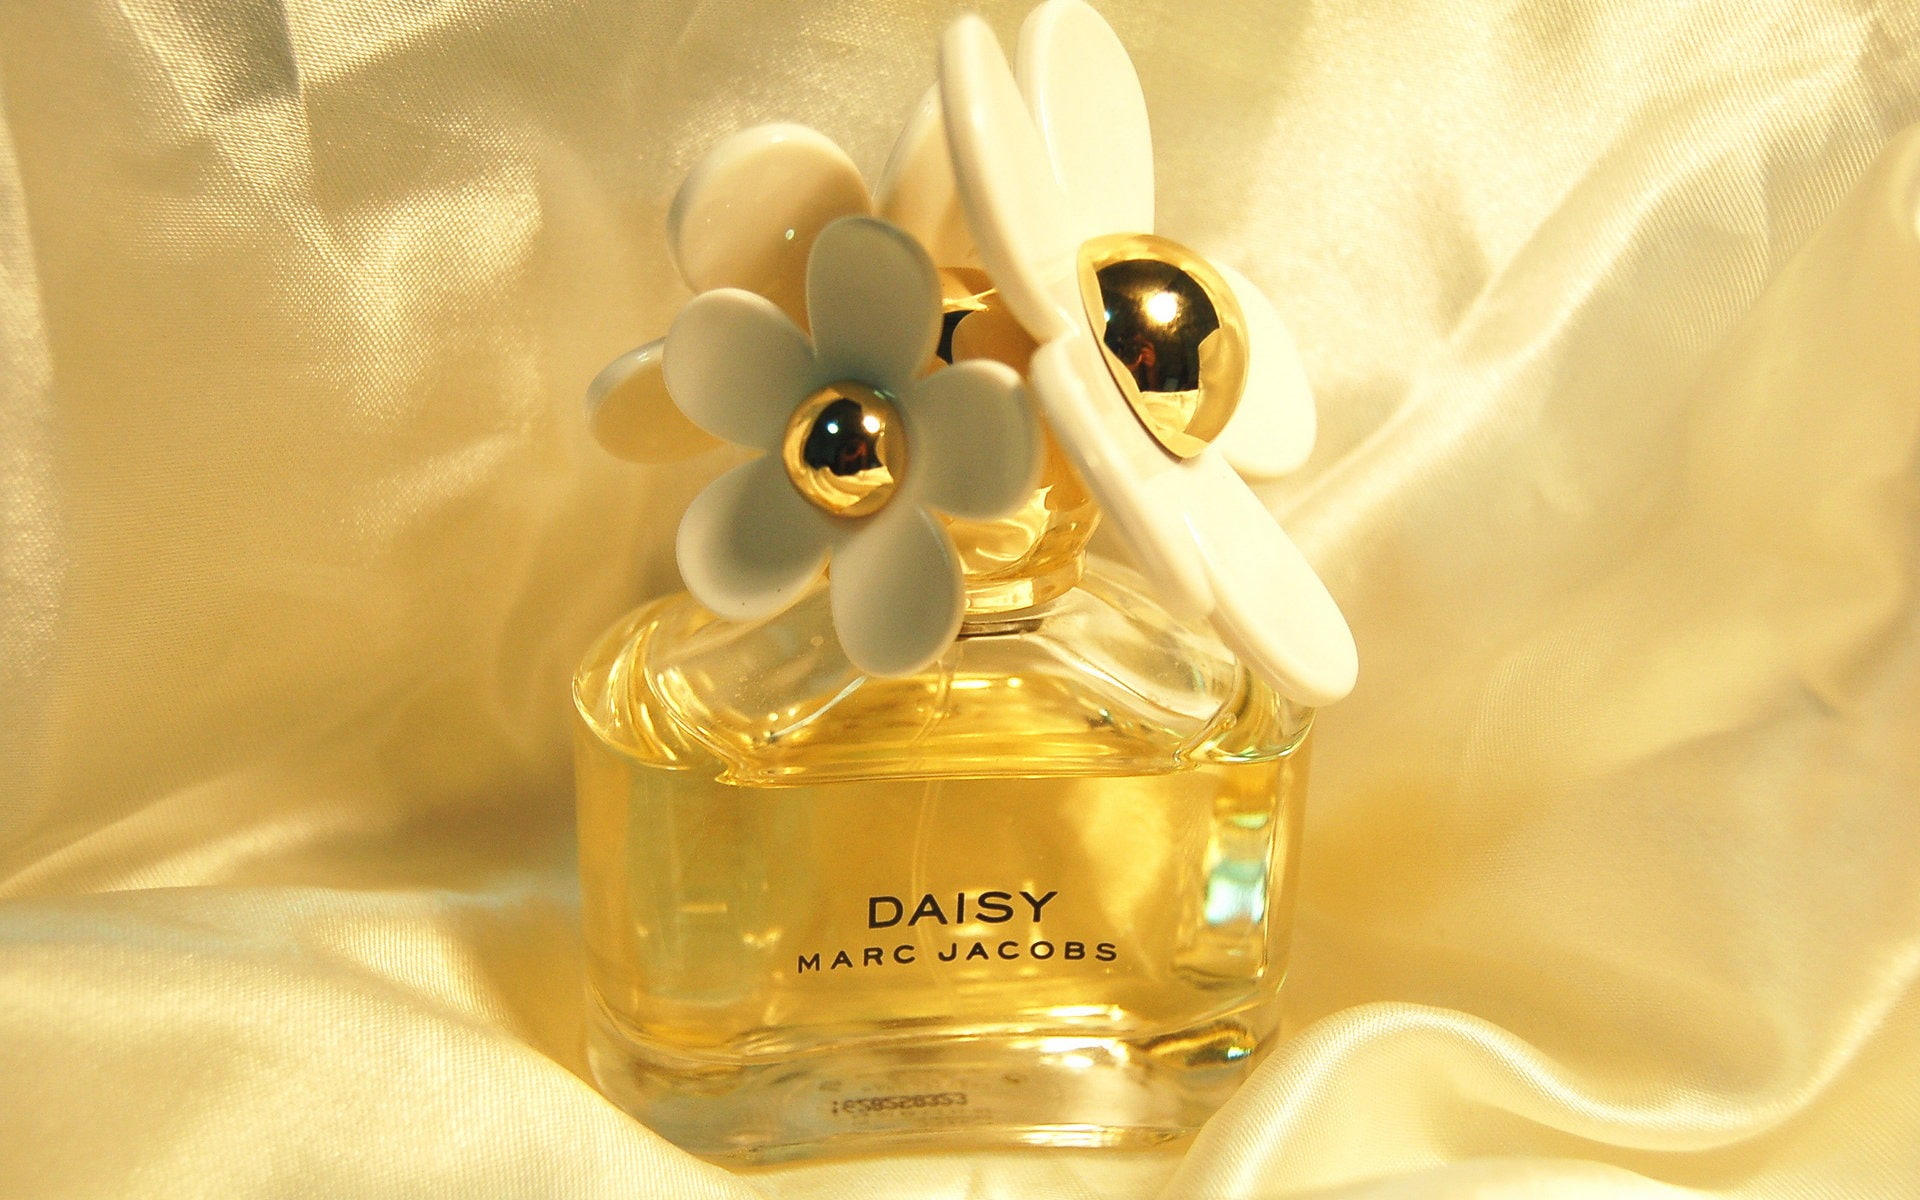 Daisy Brand Perfume Wallpaper, Marc Jacobs Daisy Fragrance 品牌 香水 壁纸 Wallpaper & Background Download